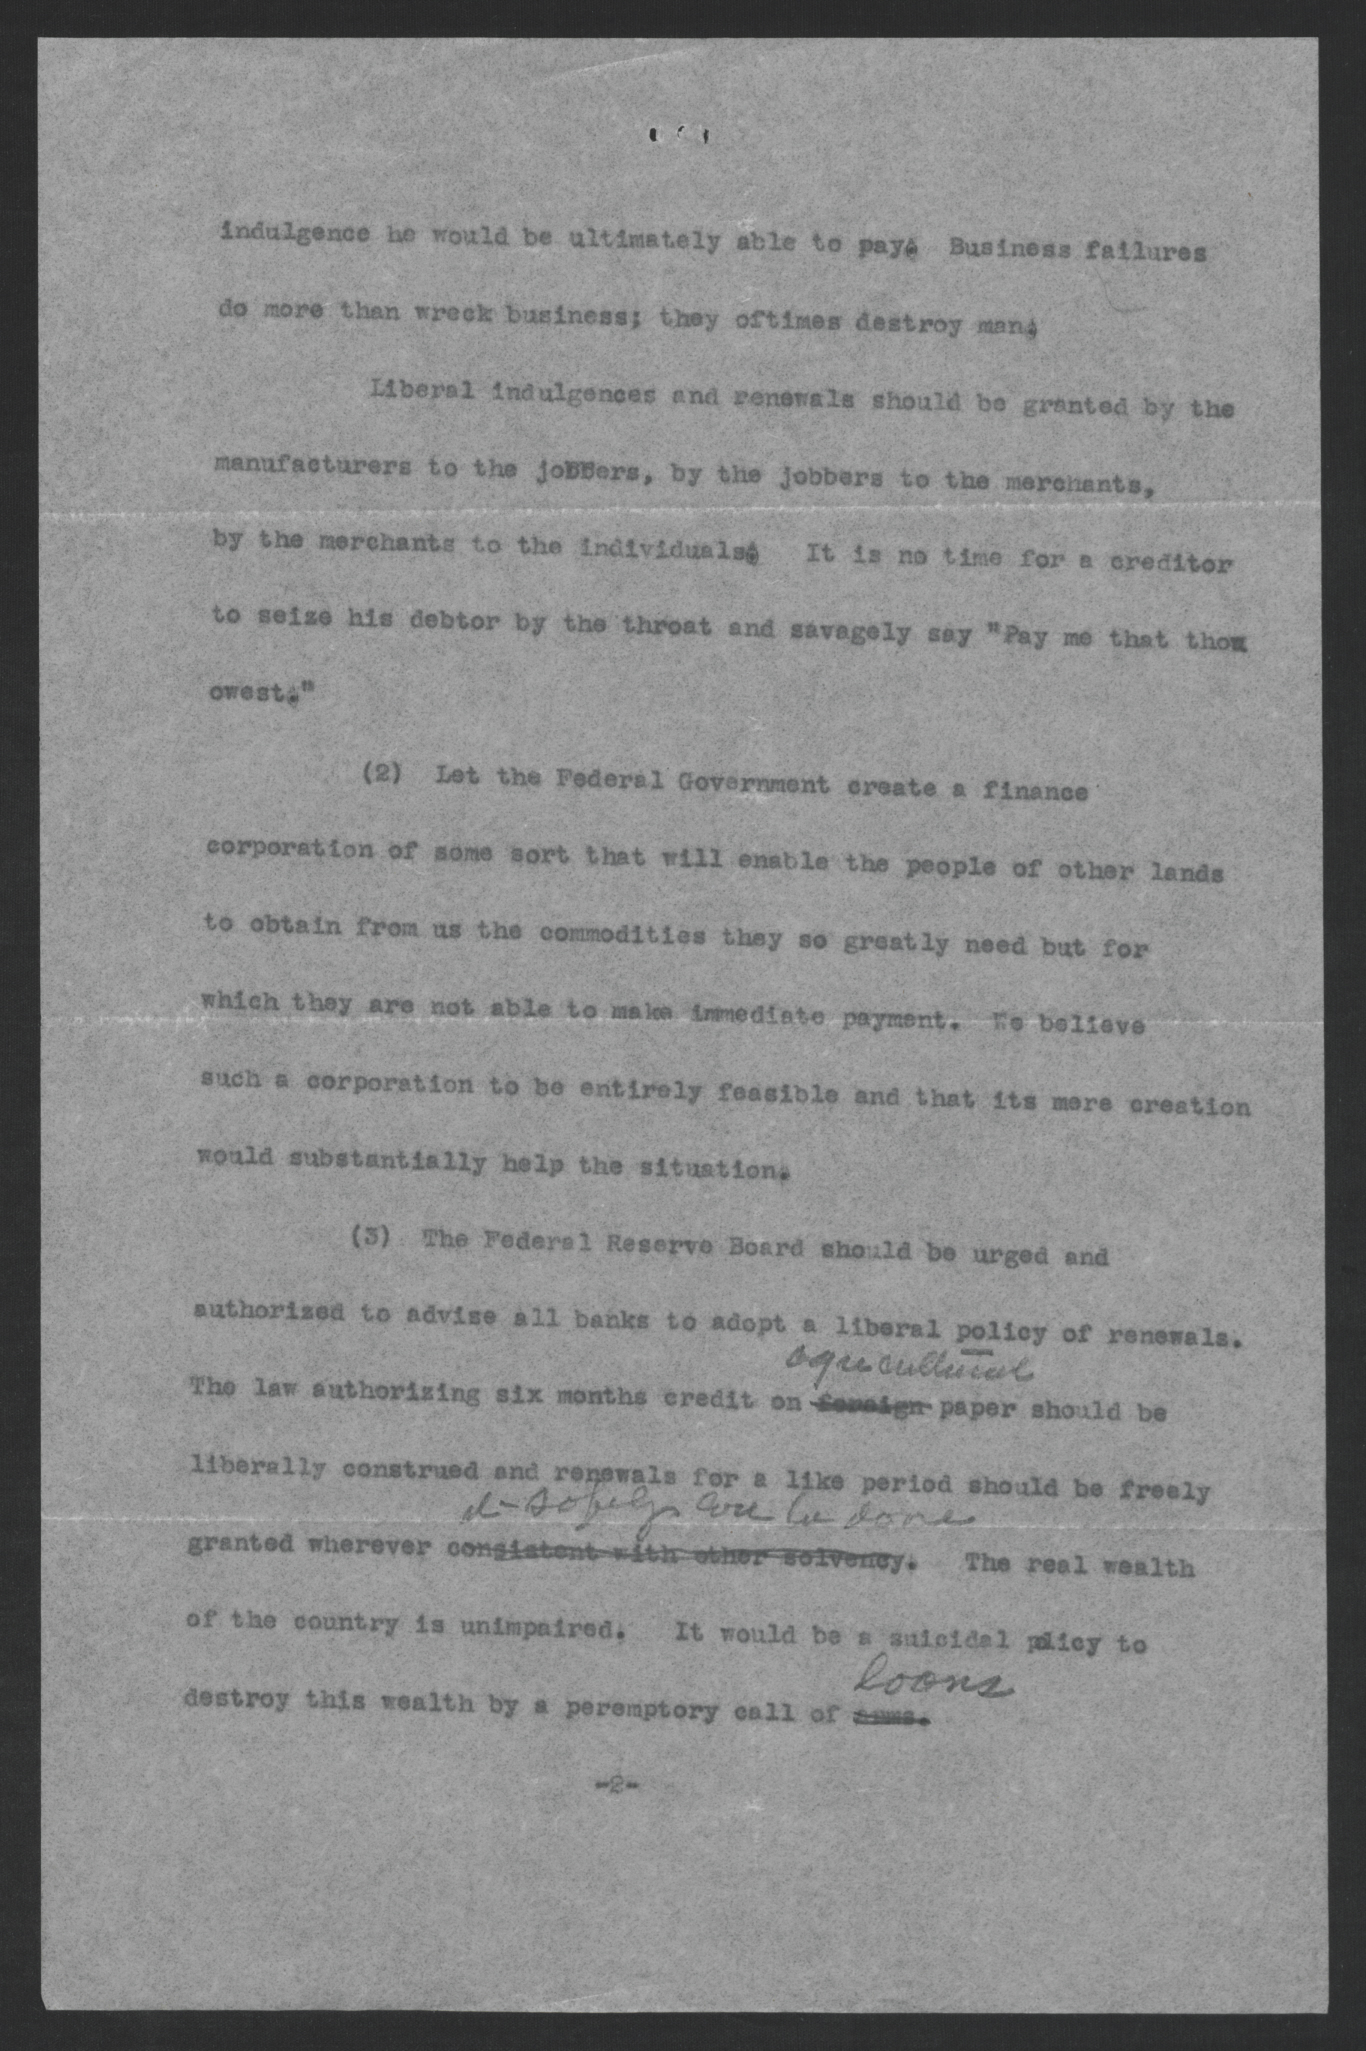 Statement by the Governors' Conference on the Nation's Financial Standing, December 2, 1920, page 2